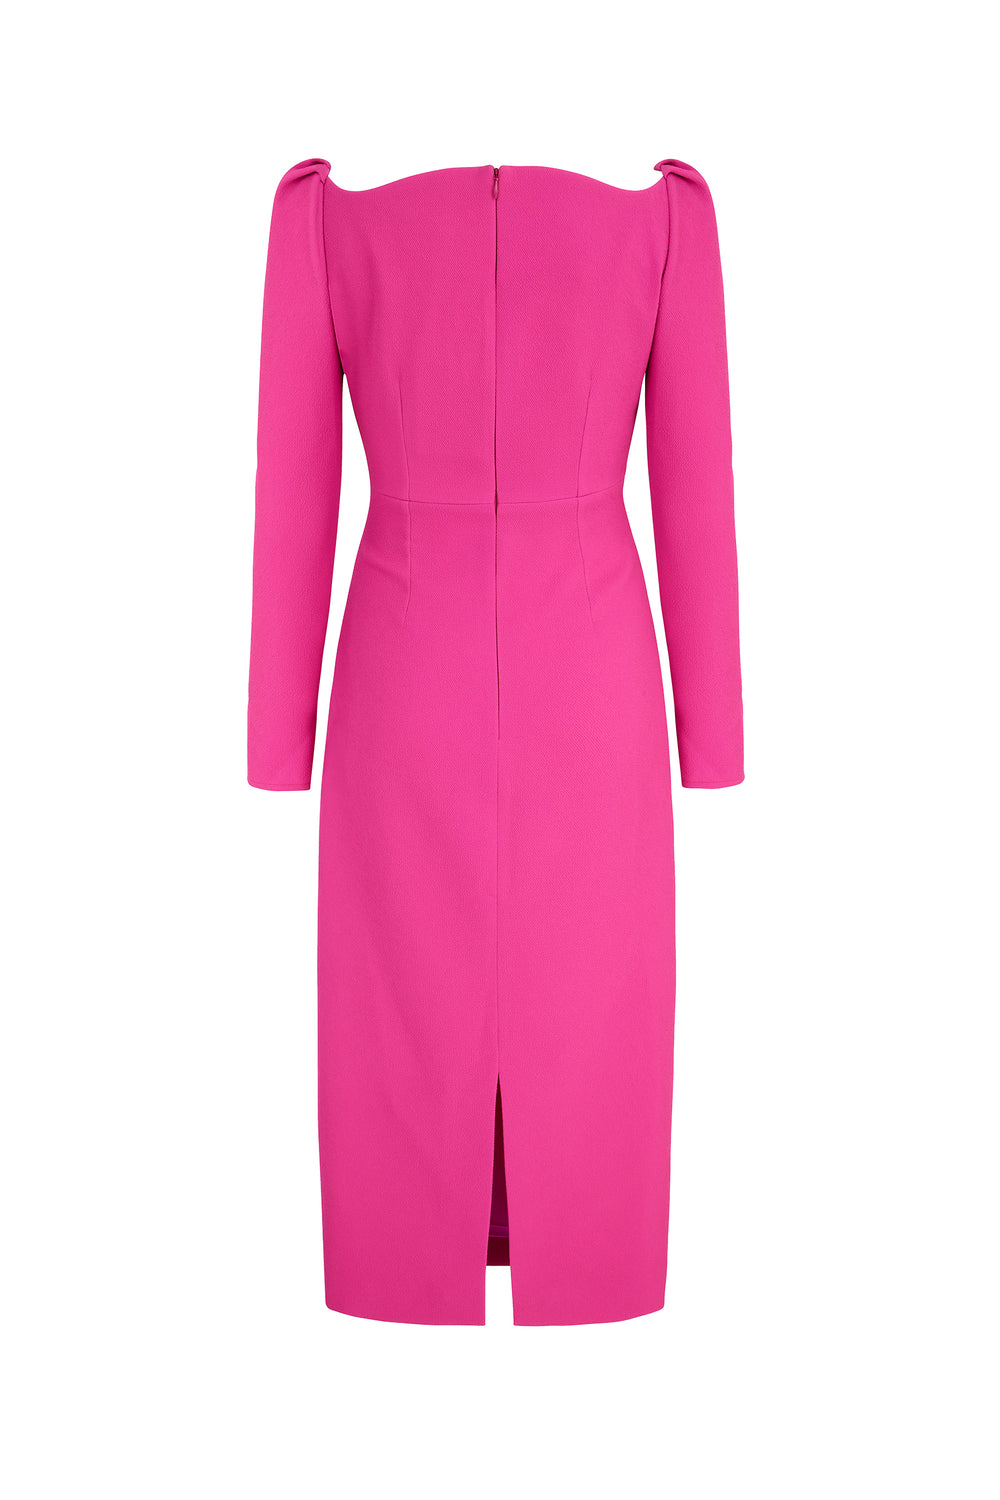 Halley Crepe Hot | Suzannah Dress London | Pink Stretch